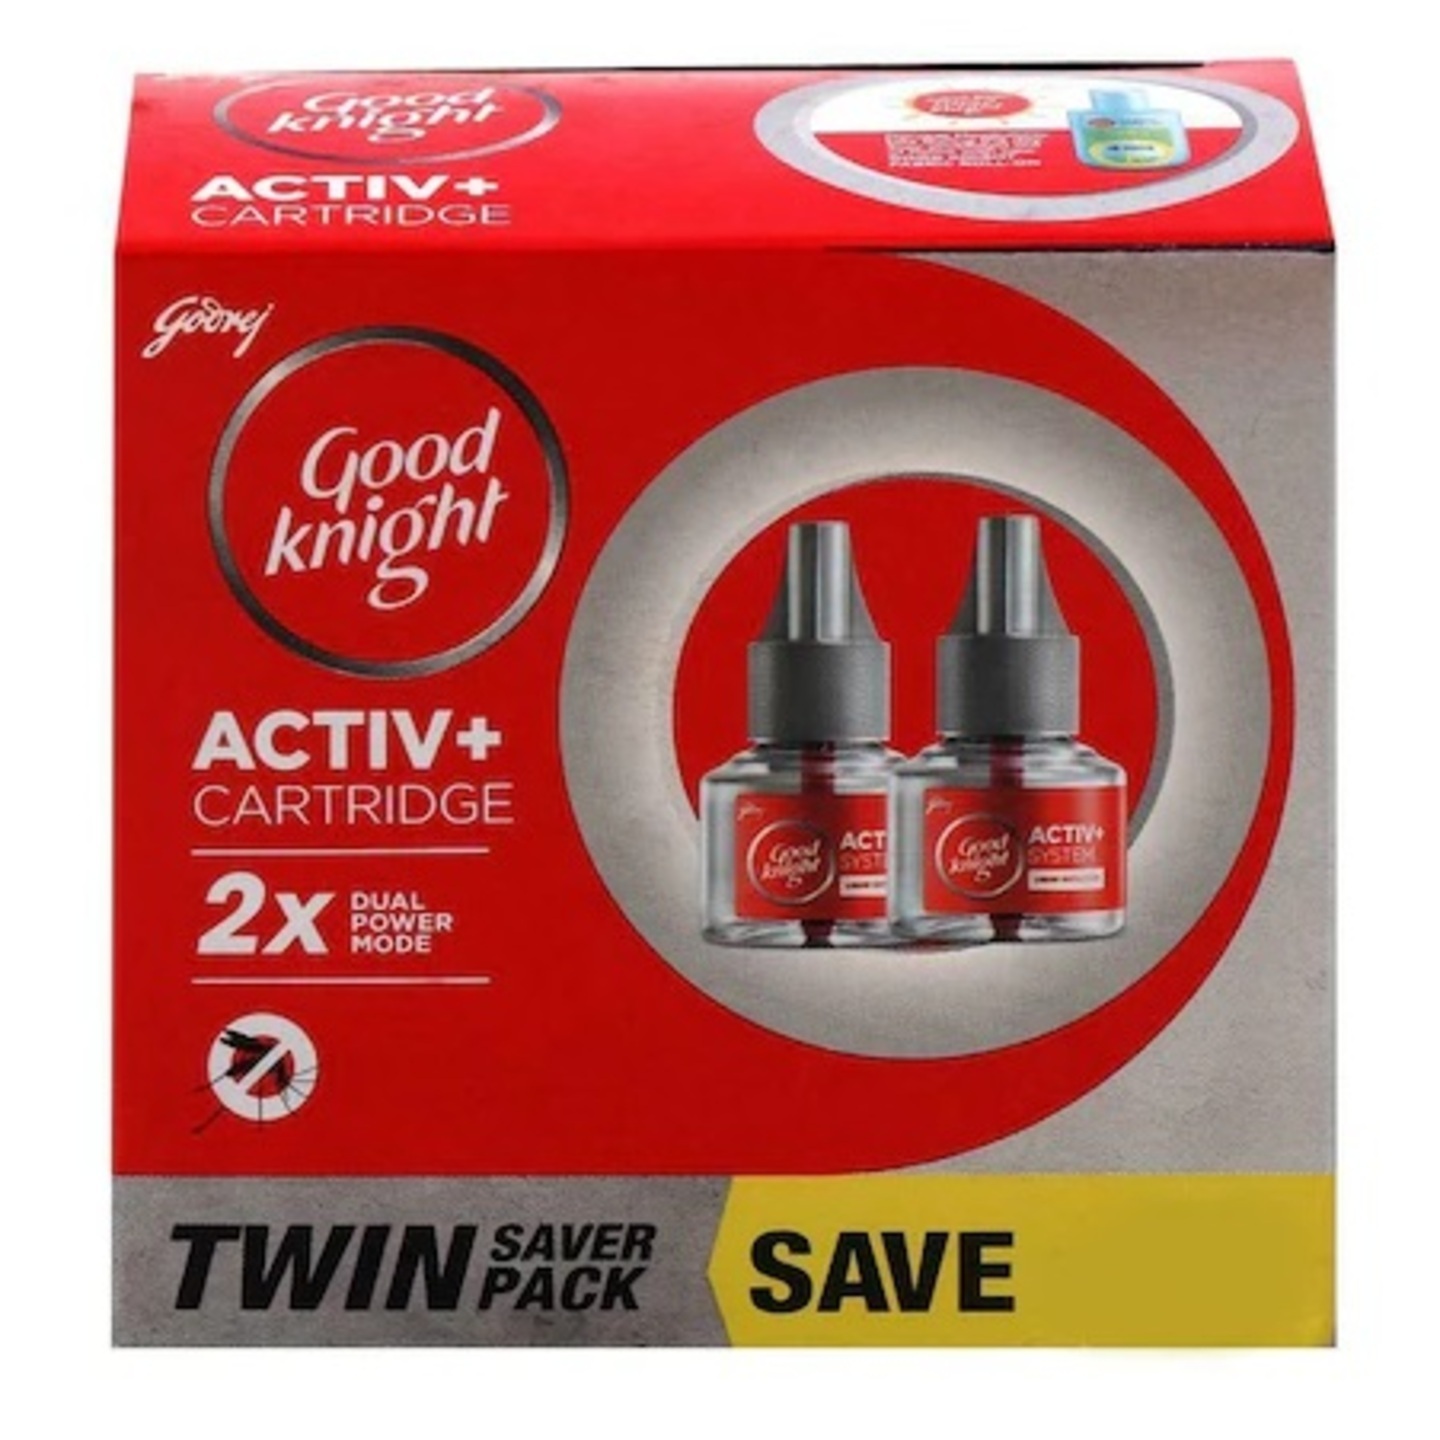 Good Knight Power Activ+ Mosquito Repellent Refill 45 ml Pack of 2